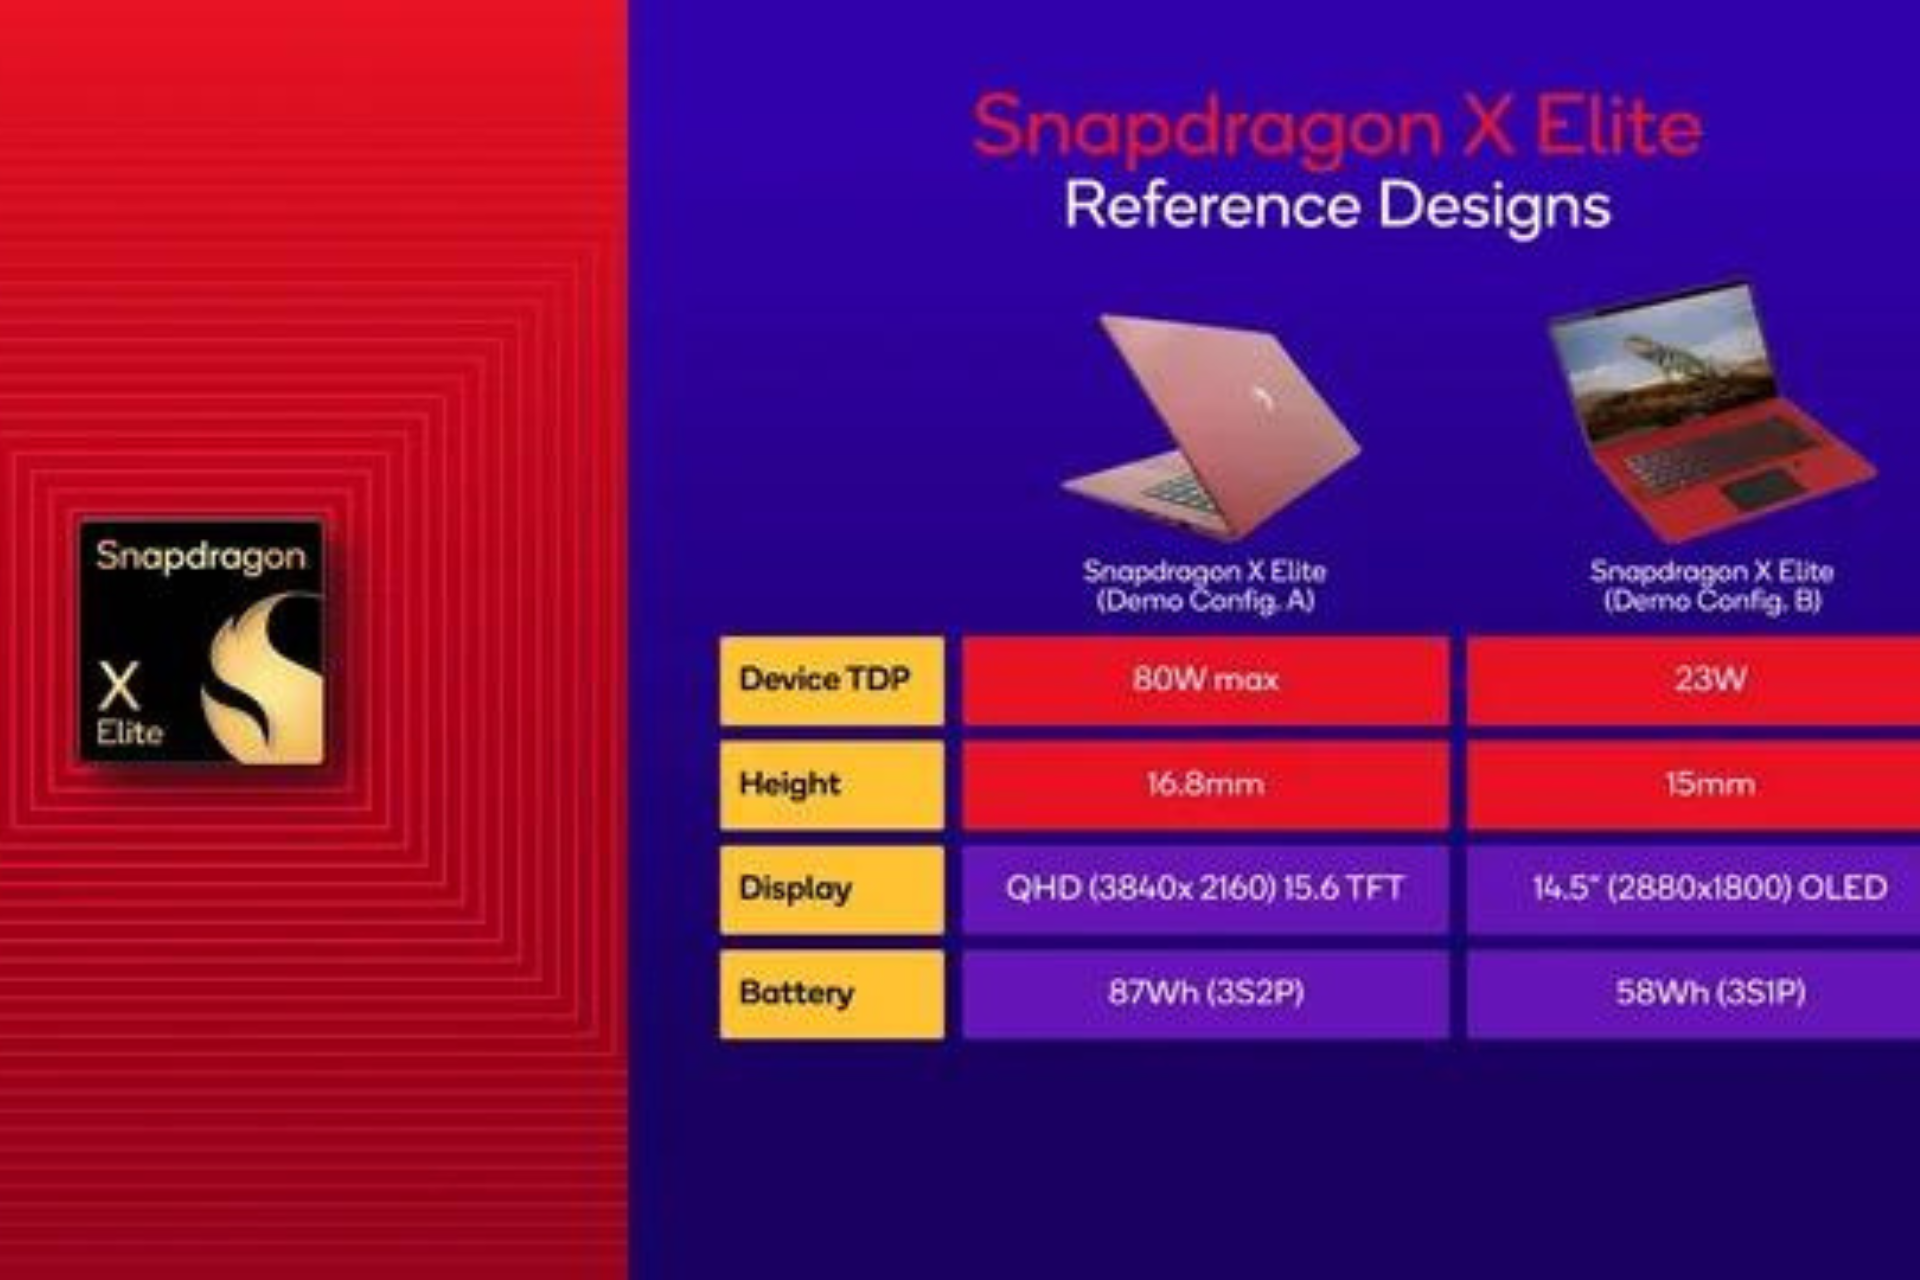 Another Snapdragon X Elite for Windows 11 is in works?